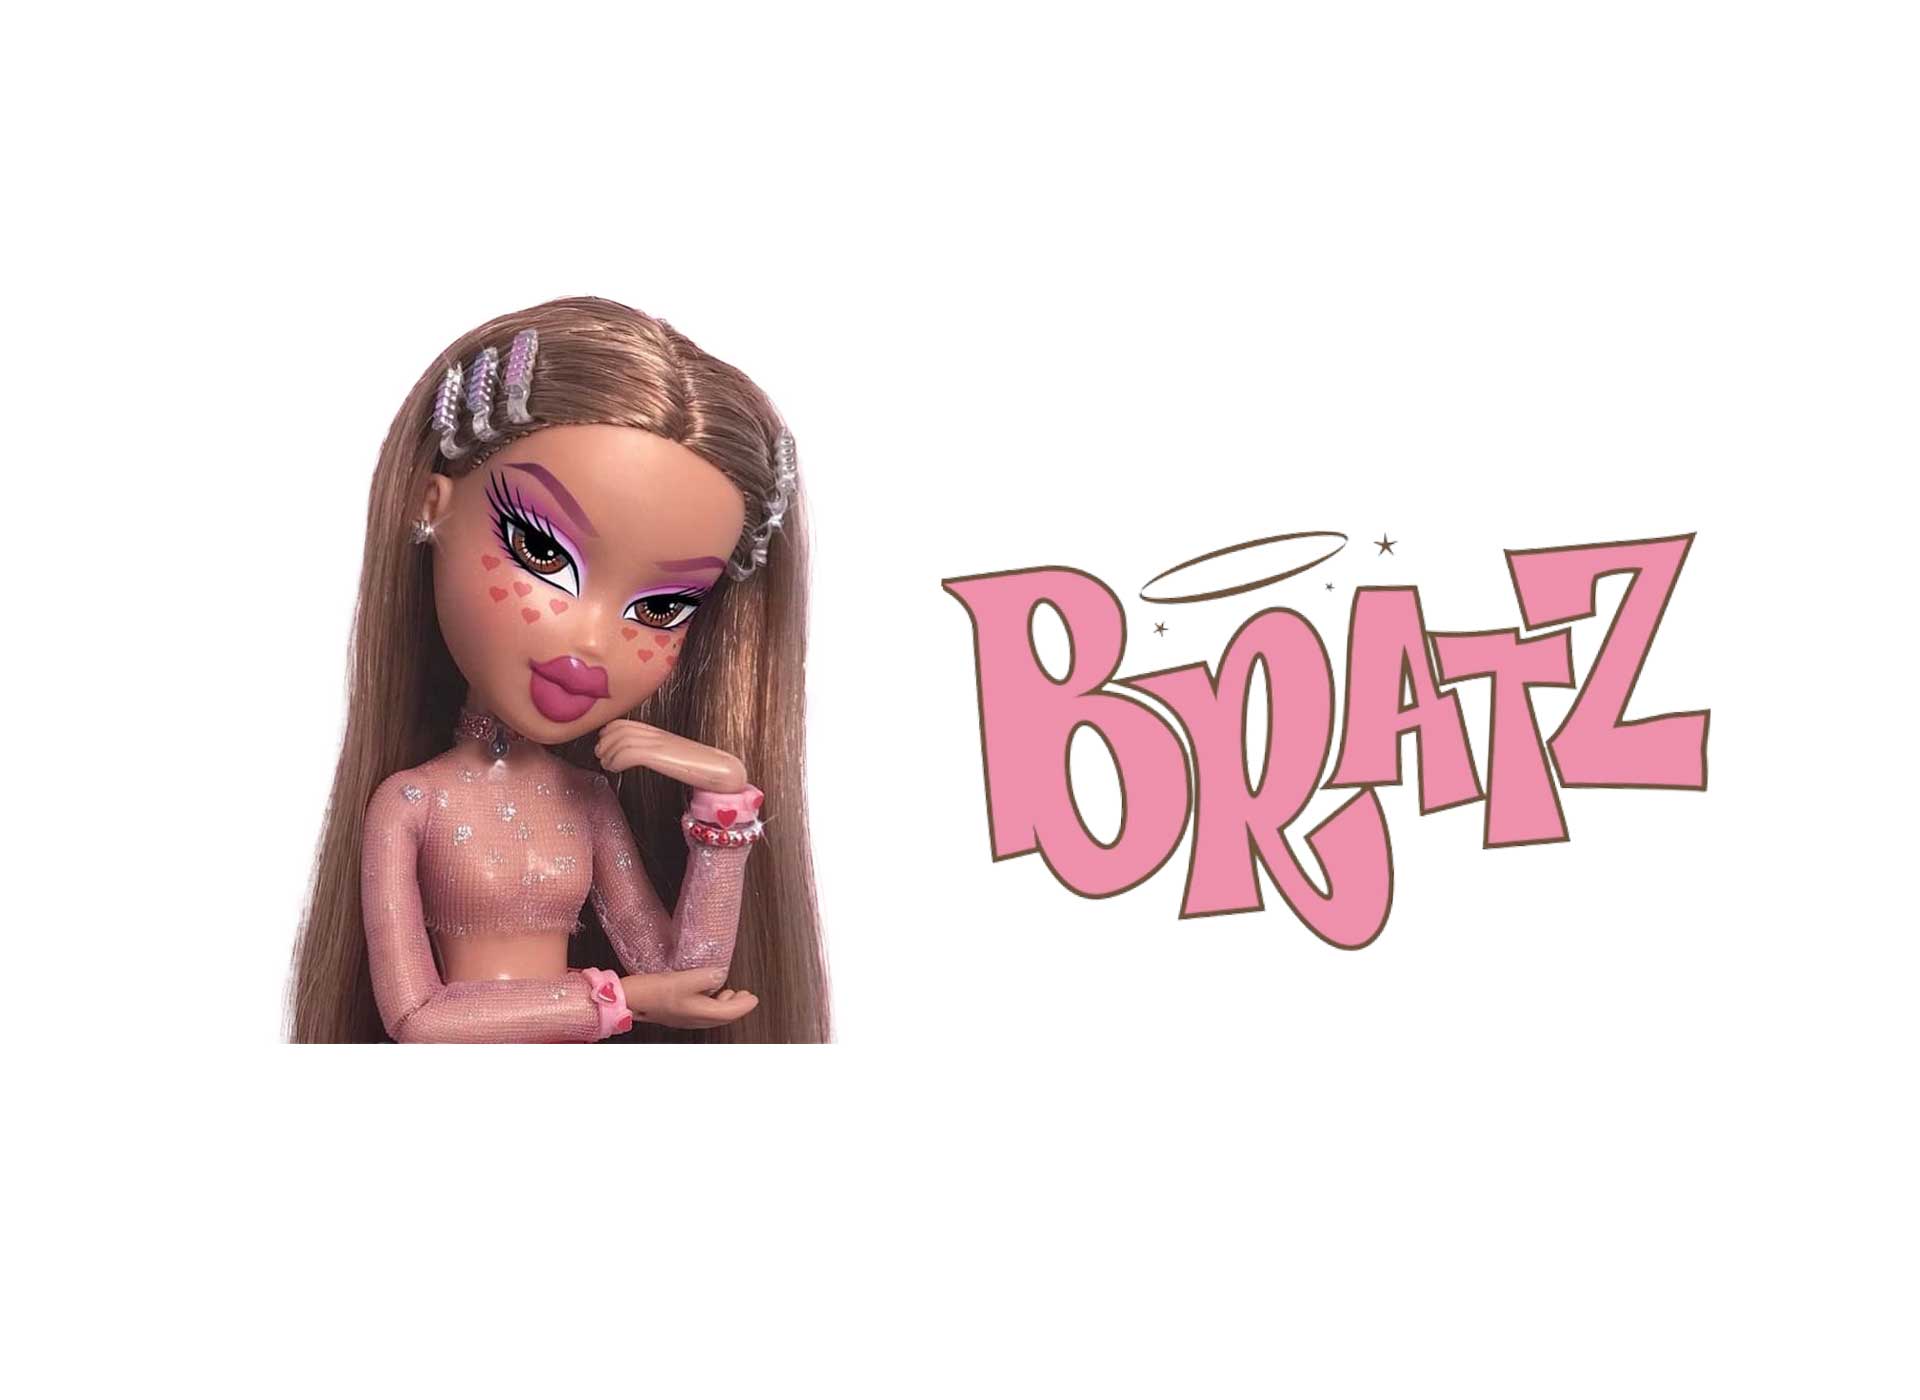 Bratz doll shoes  10 for sale in Ireland 